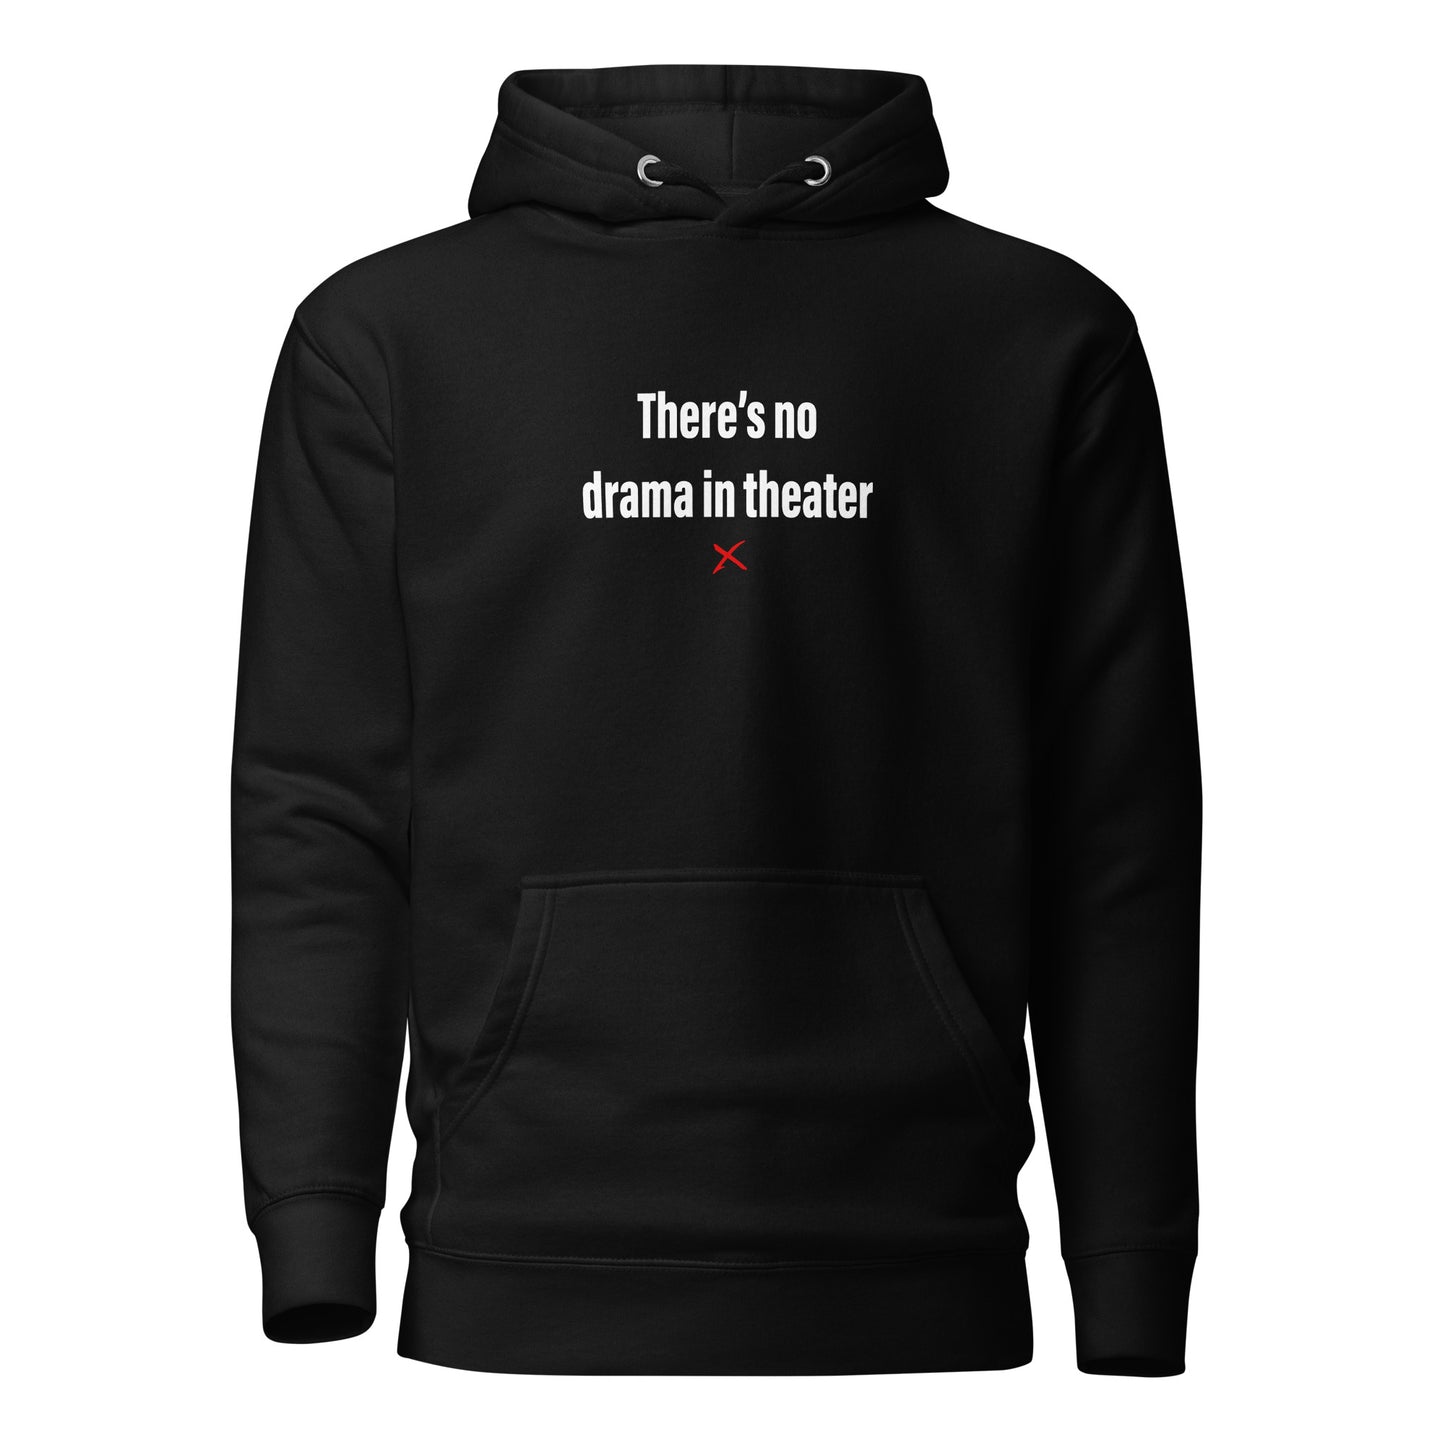 There's no drama in theater - Hoodie